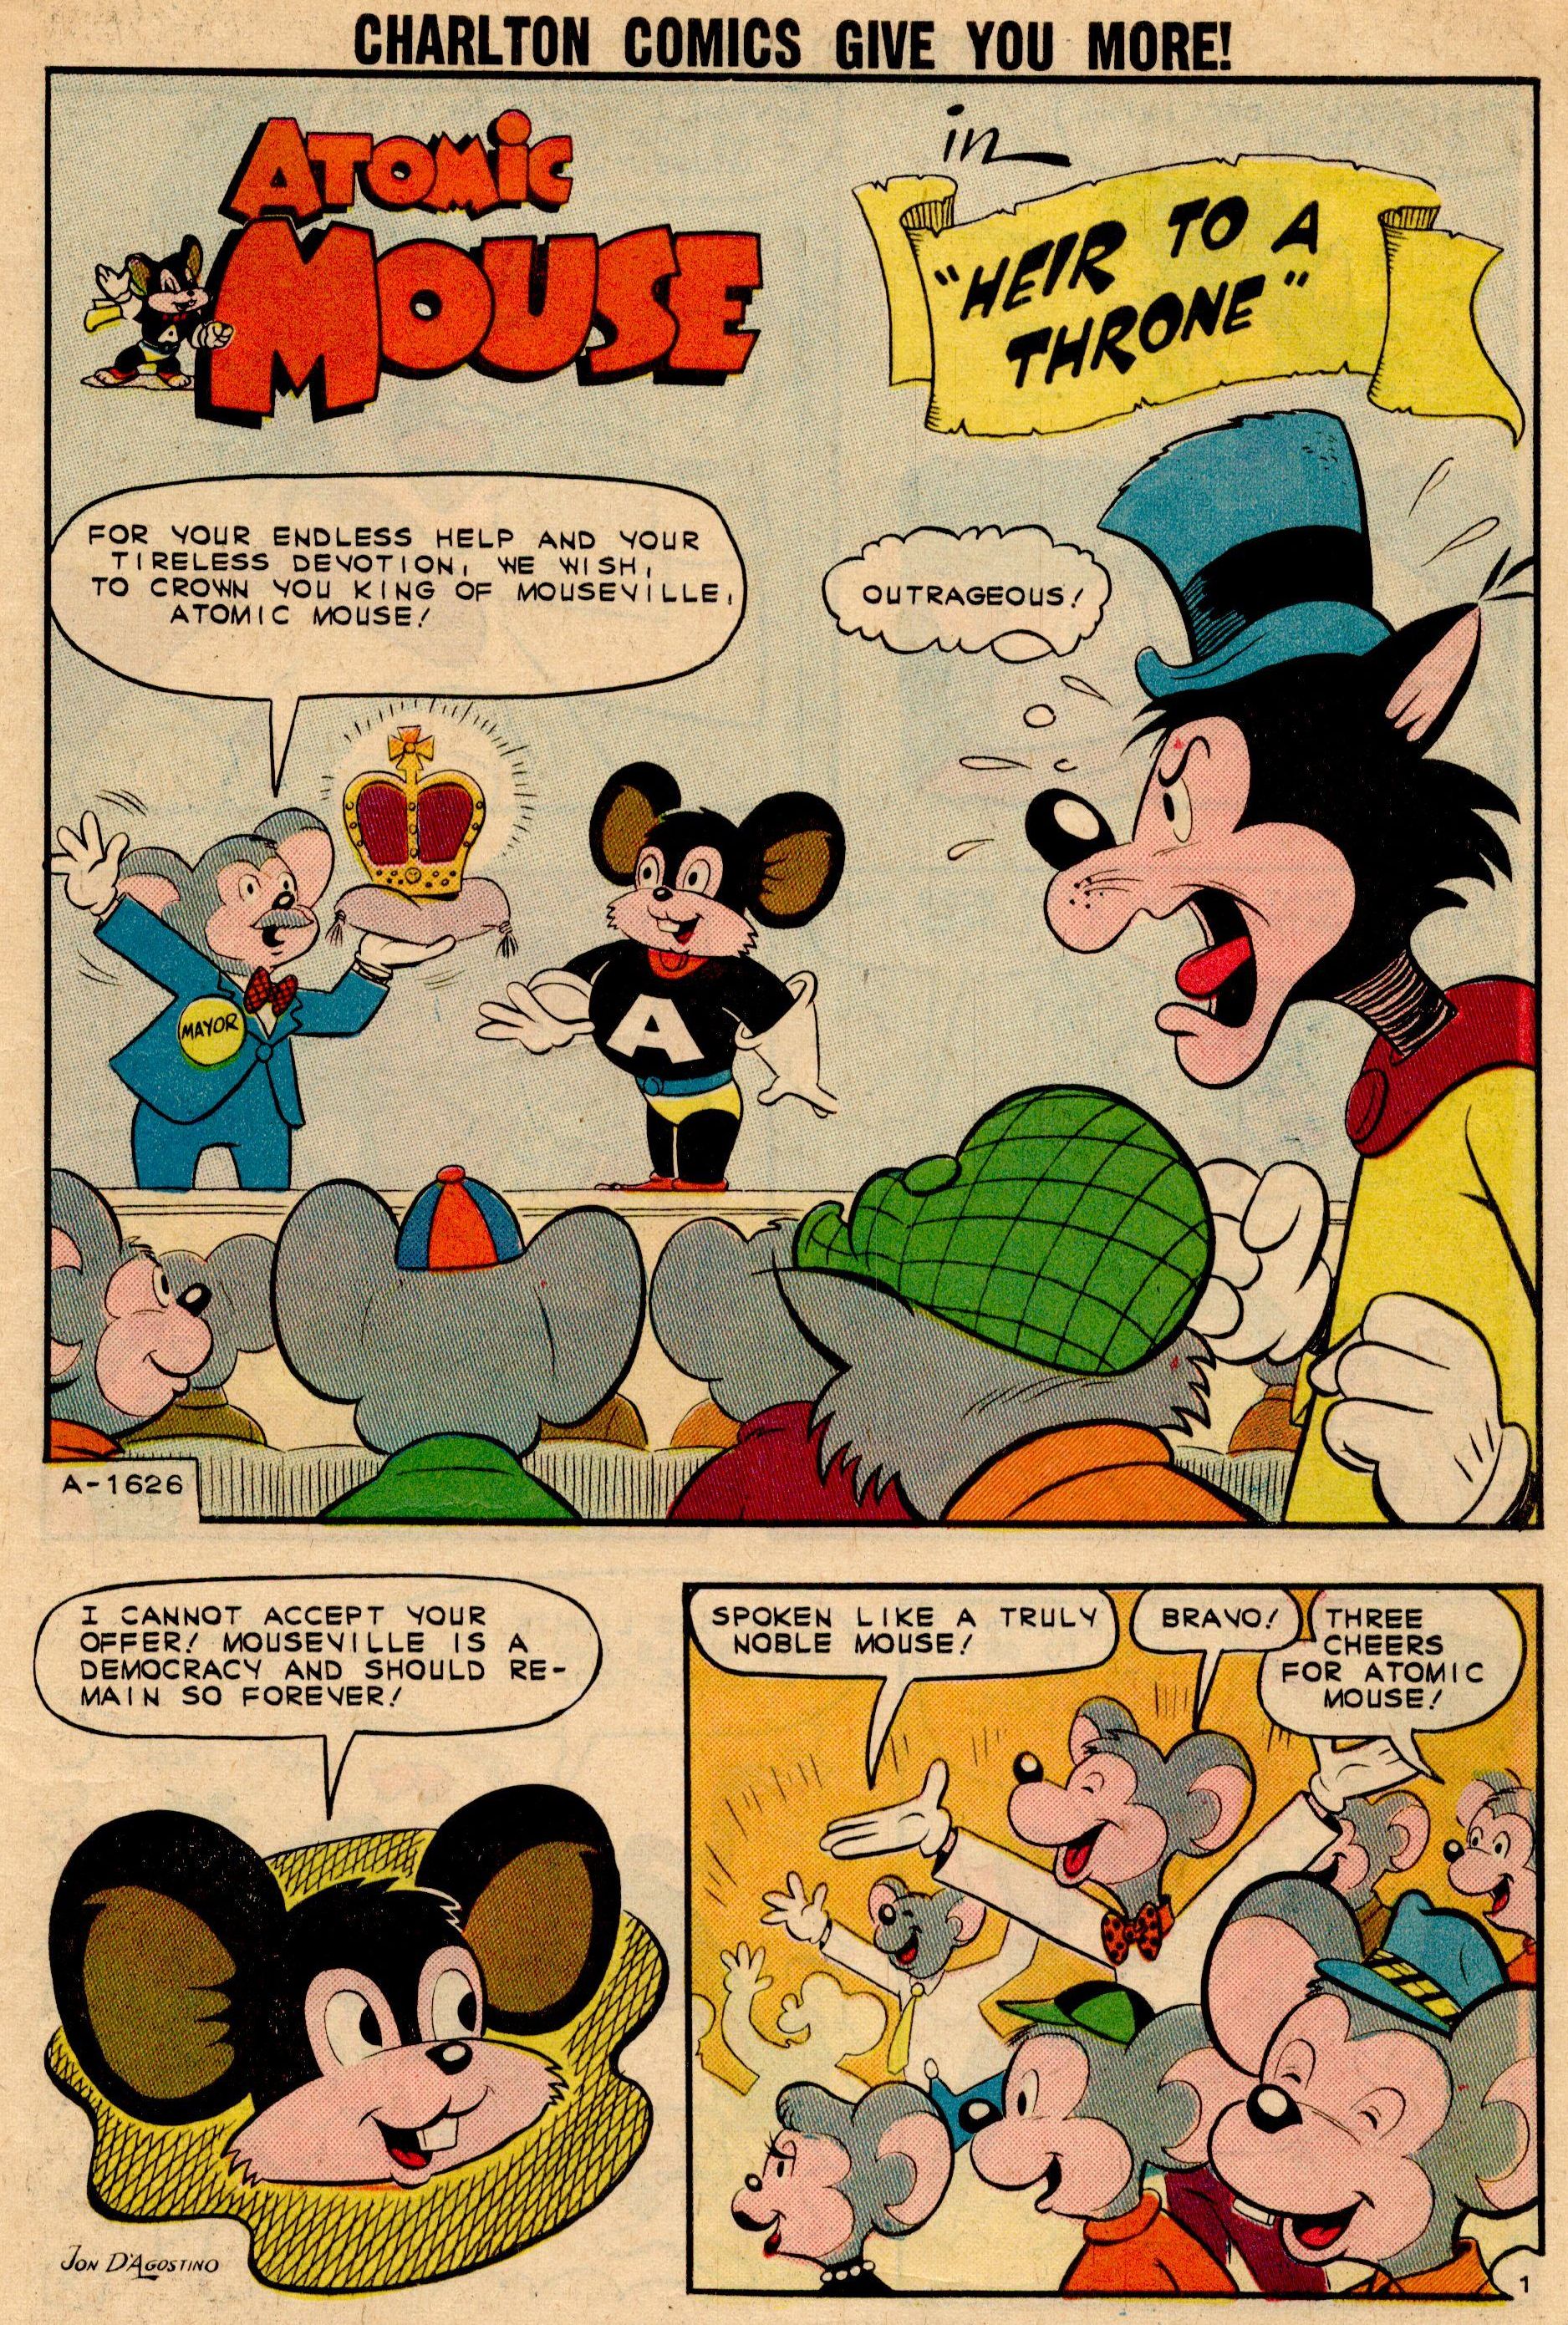 Read online Atomic Mouse comic -  Issue #49 - 3